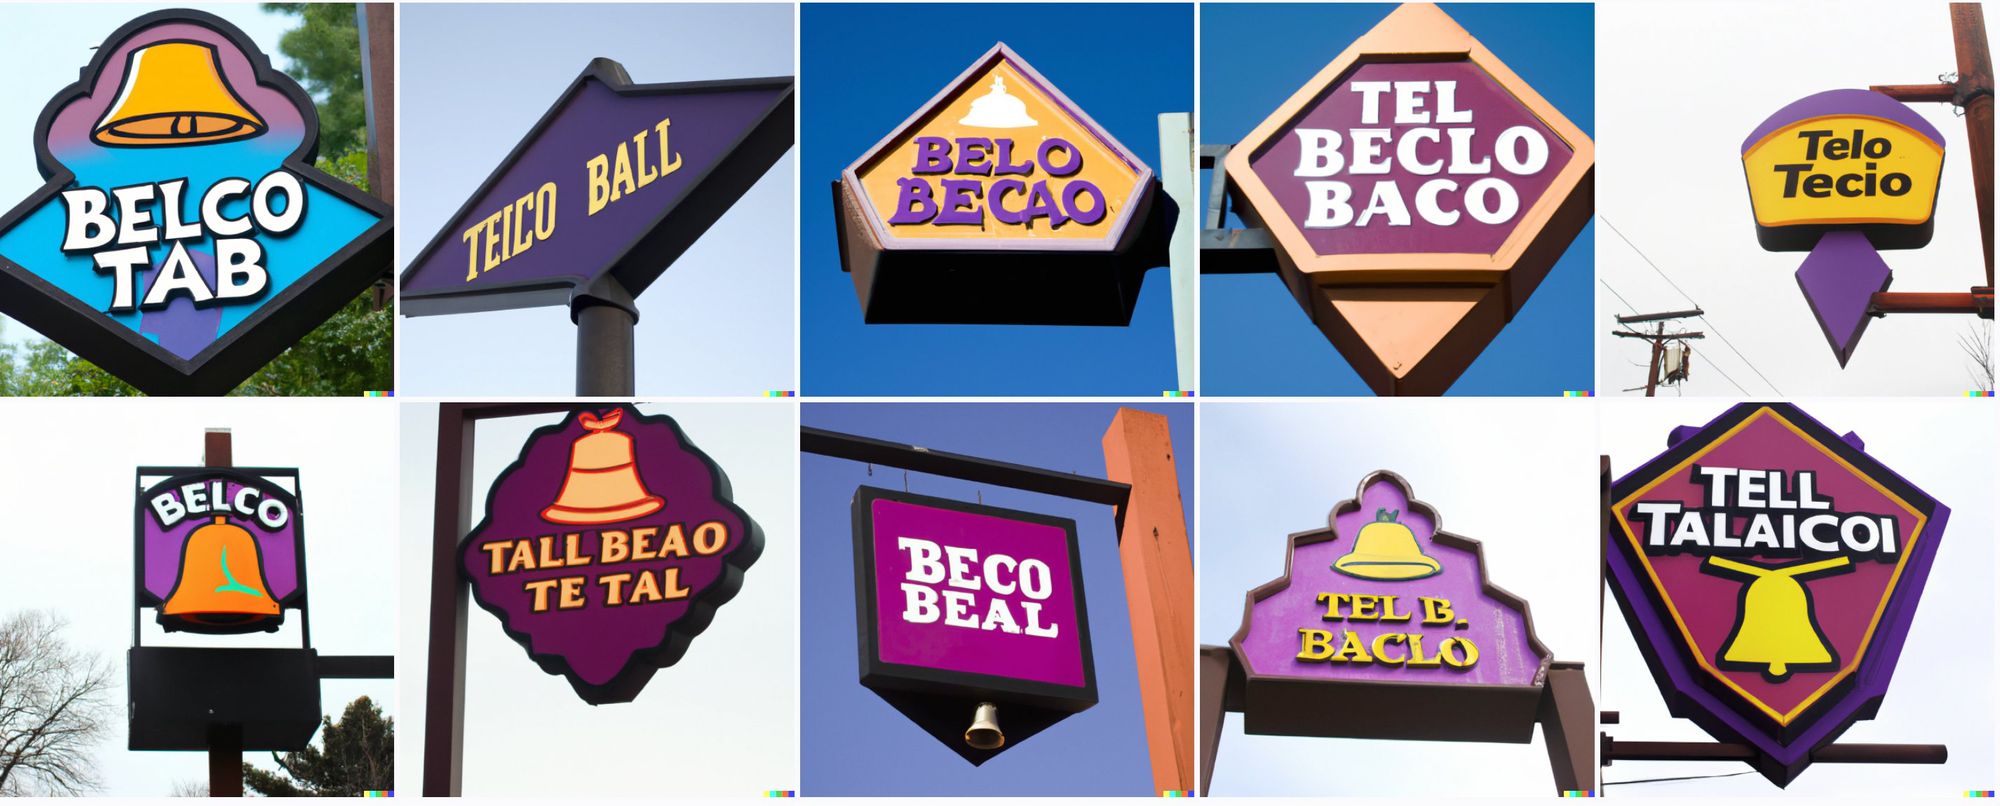 Store signs mostly in purple and yellow. Many of them are triangular and/or include cartoon bells. One has a real bell, ludicrously tiny. They read things like "Belco Tab" and "Teico Ball" and "Belo Becao" and "Tel B. Baclo"